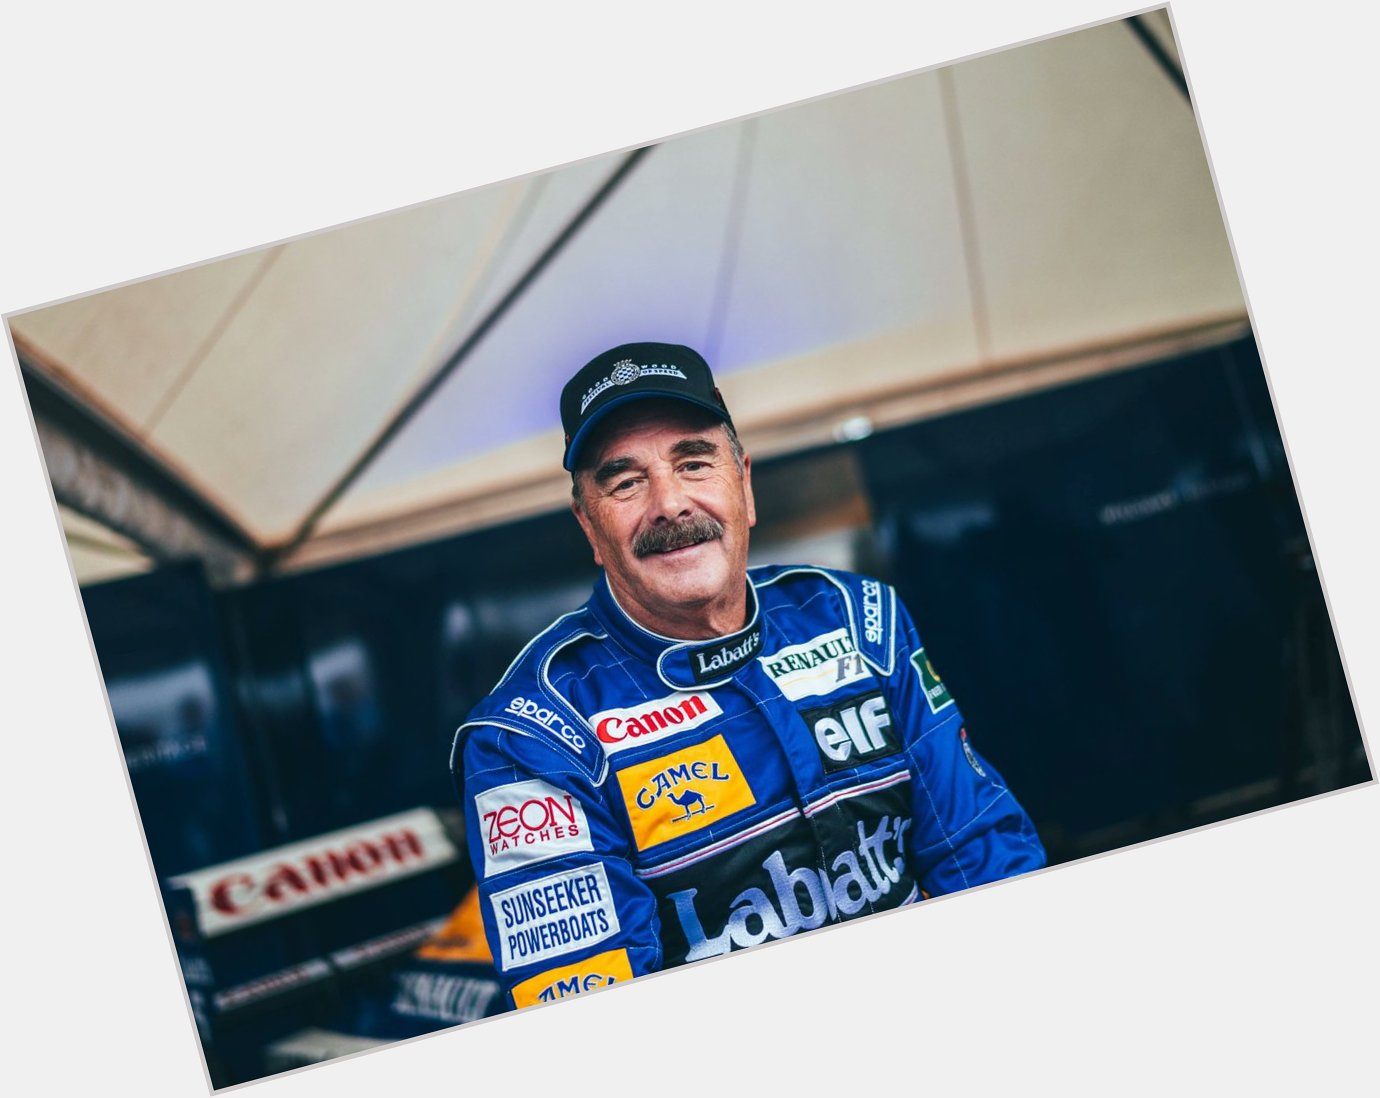 Happy Birthday Nigel Mansell! Today the ex F1 driver turns 69 